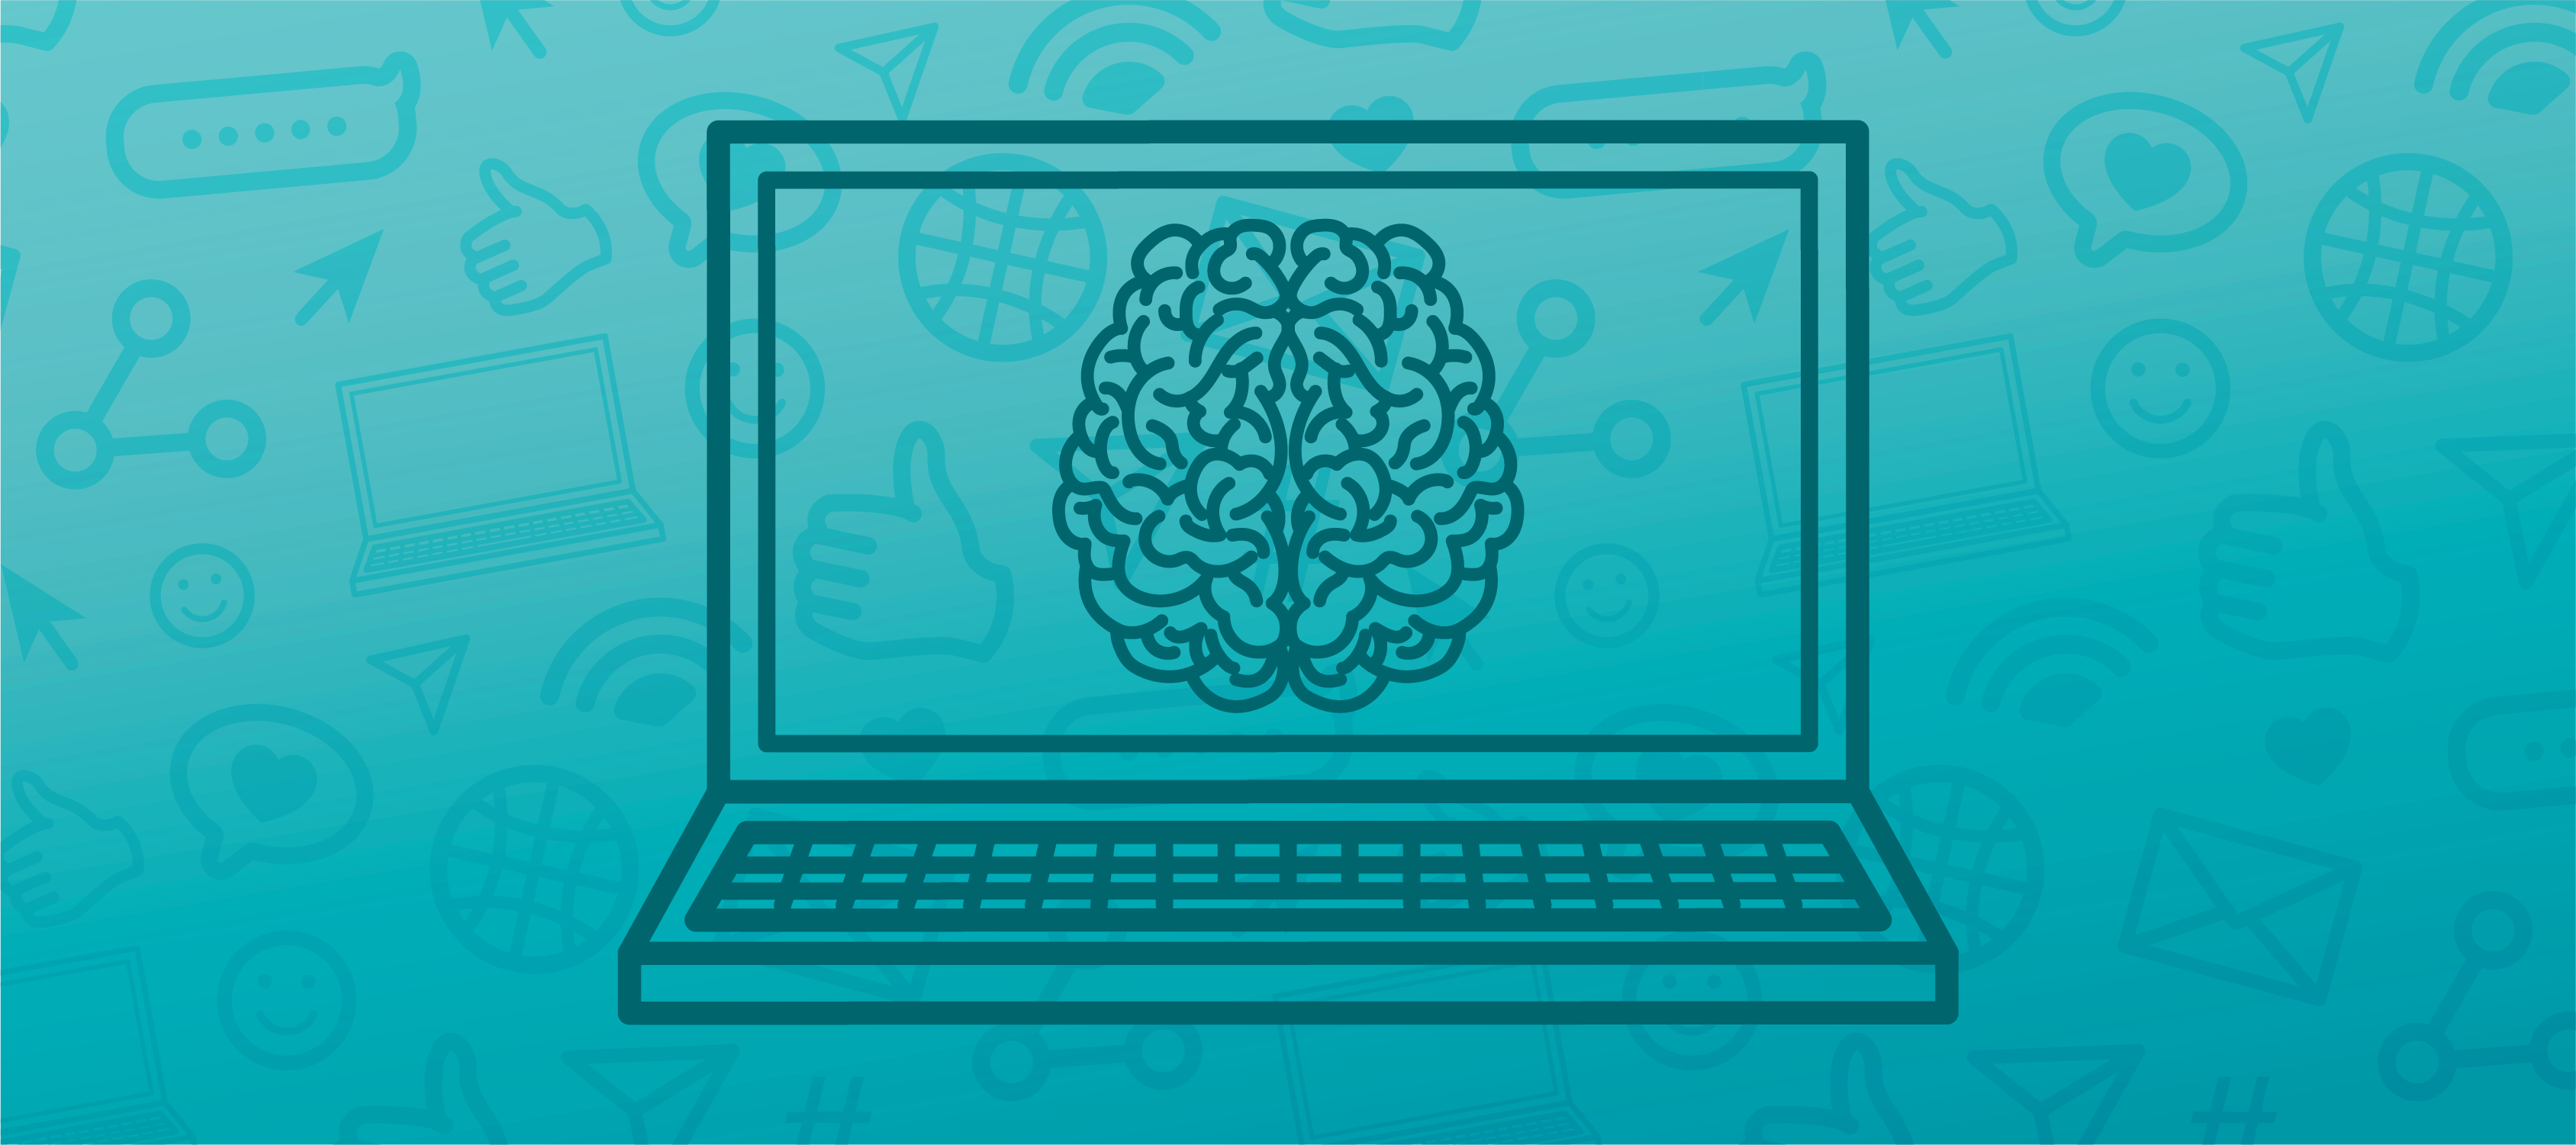 A blue header image featuring an icon of a laptop with a brain on it in the center and faded internet icons in the background